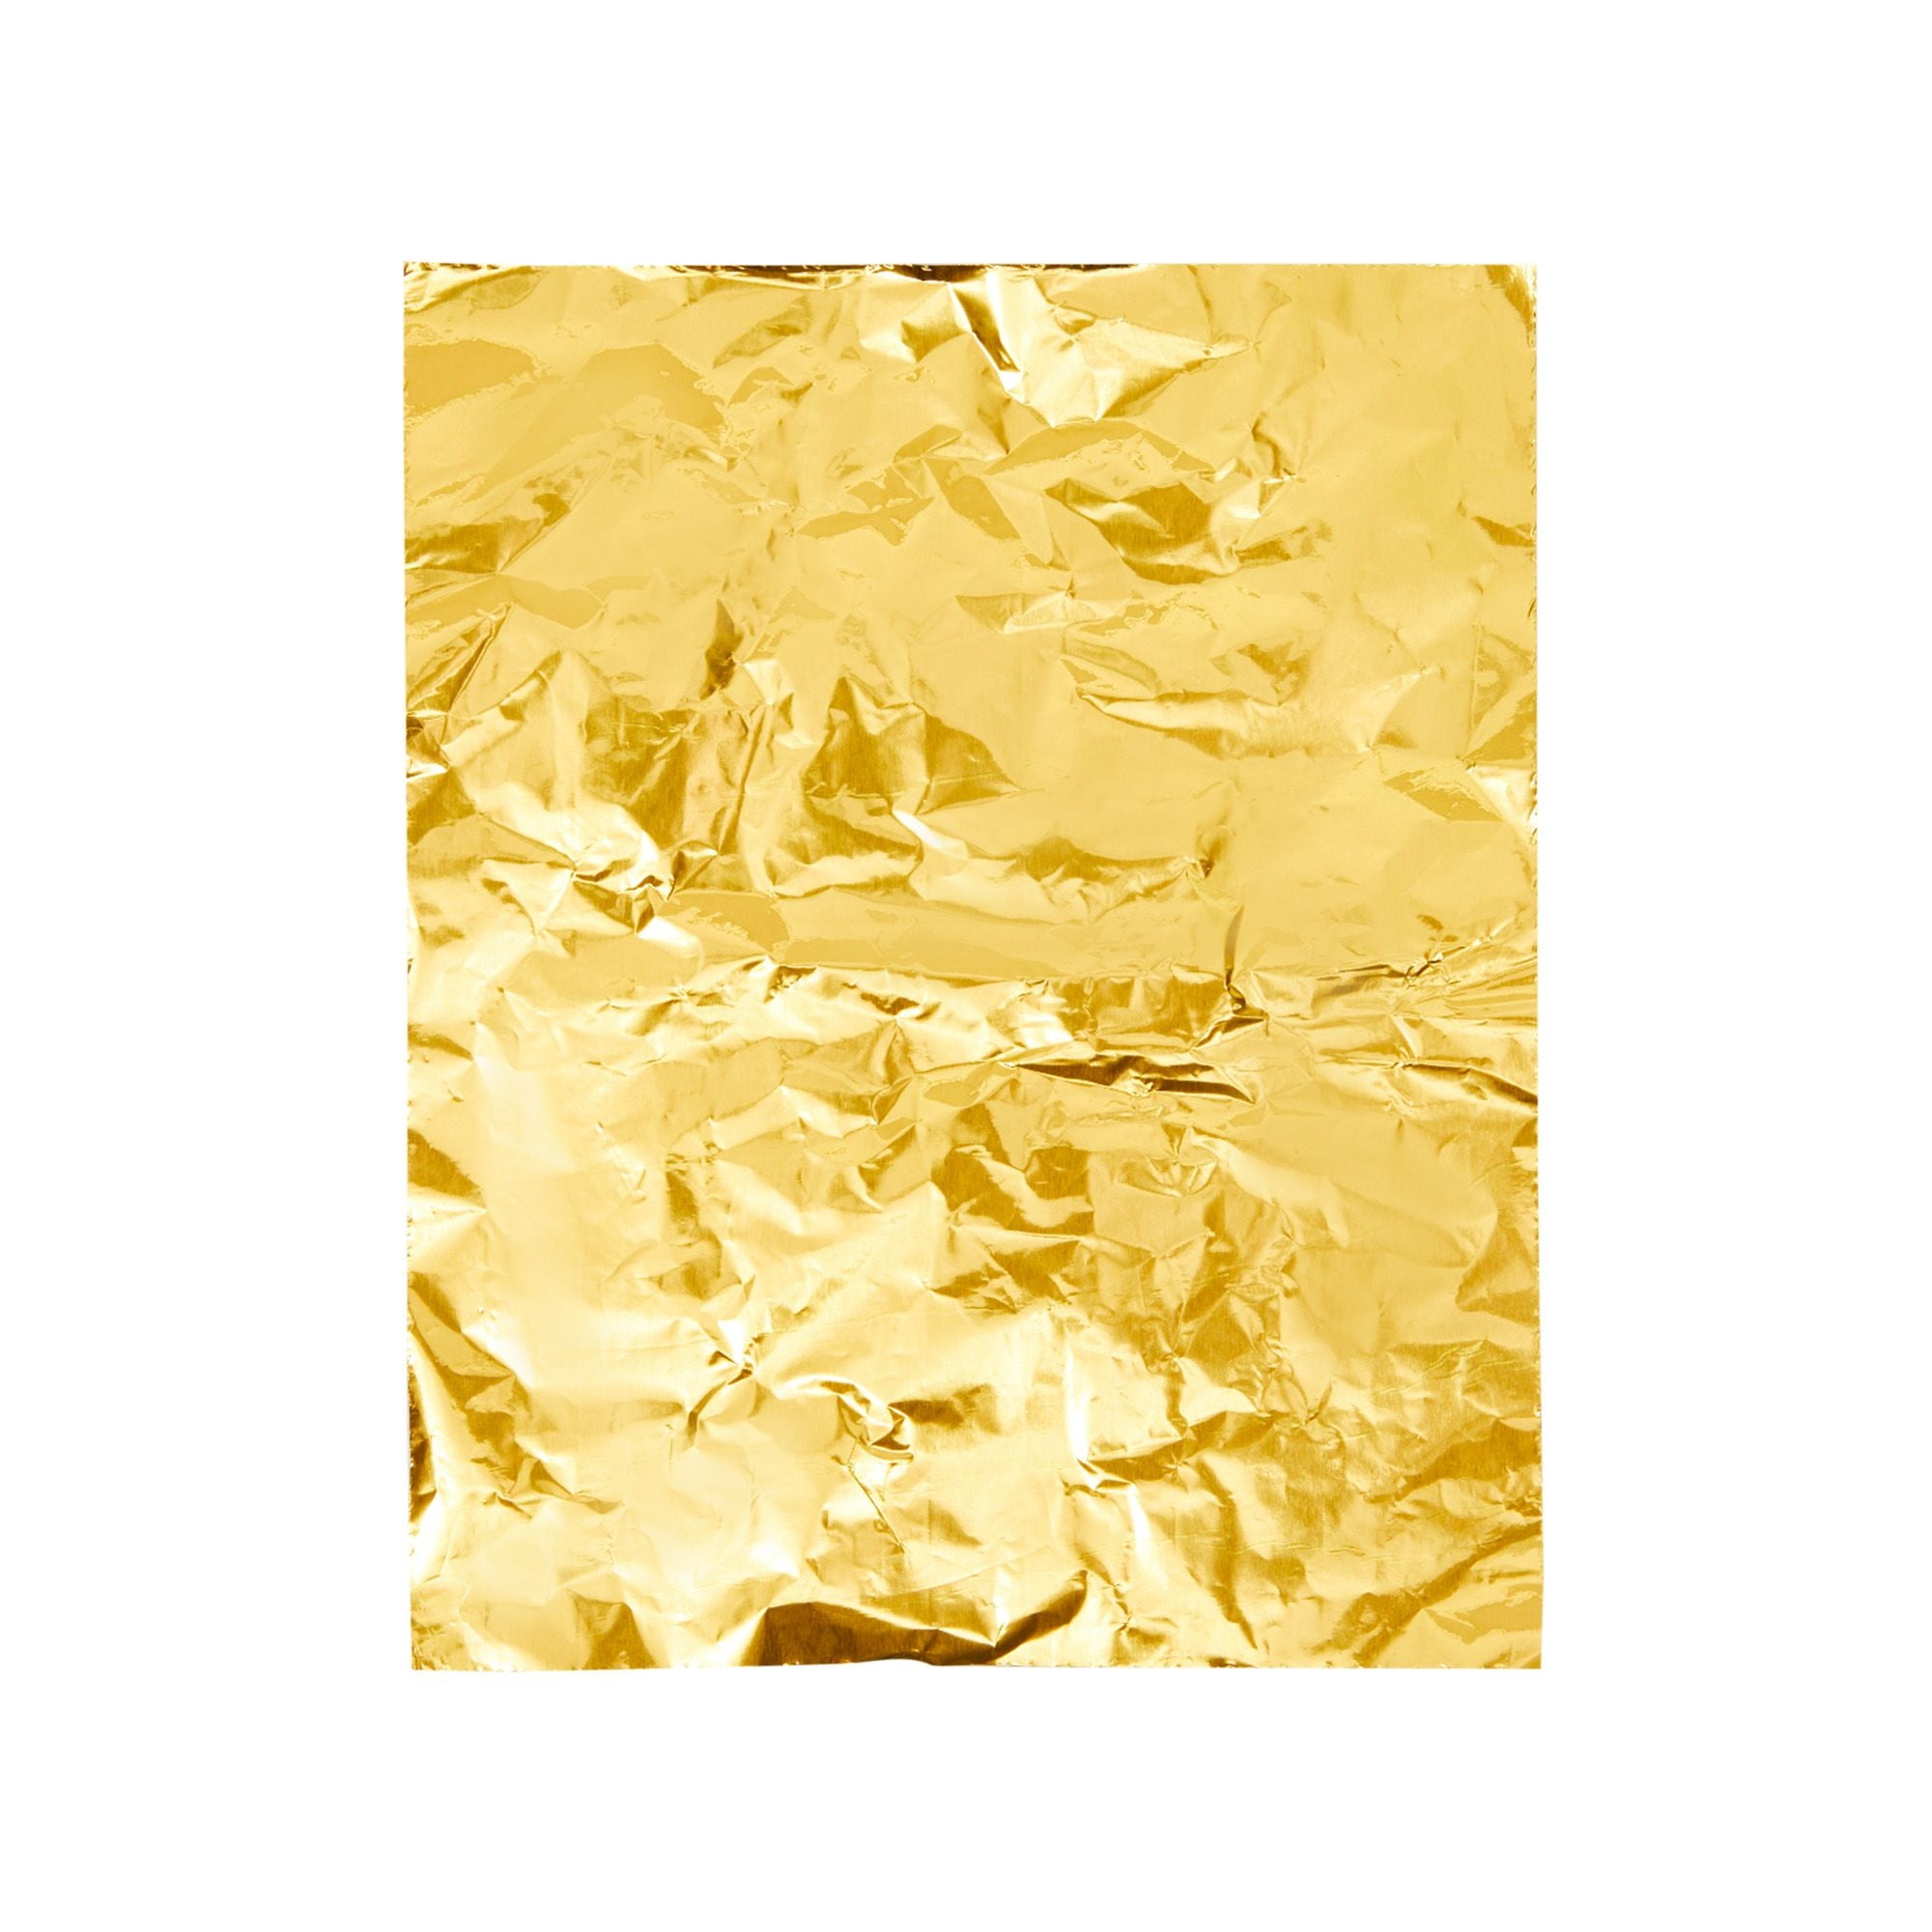  Crown Display Metallic Gold Foil Sheets For Gift